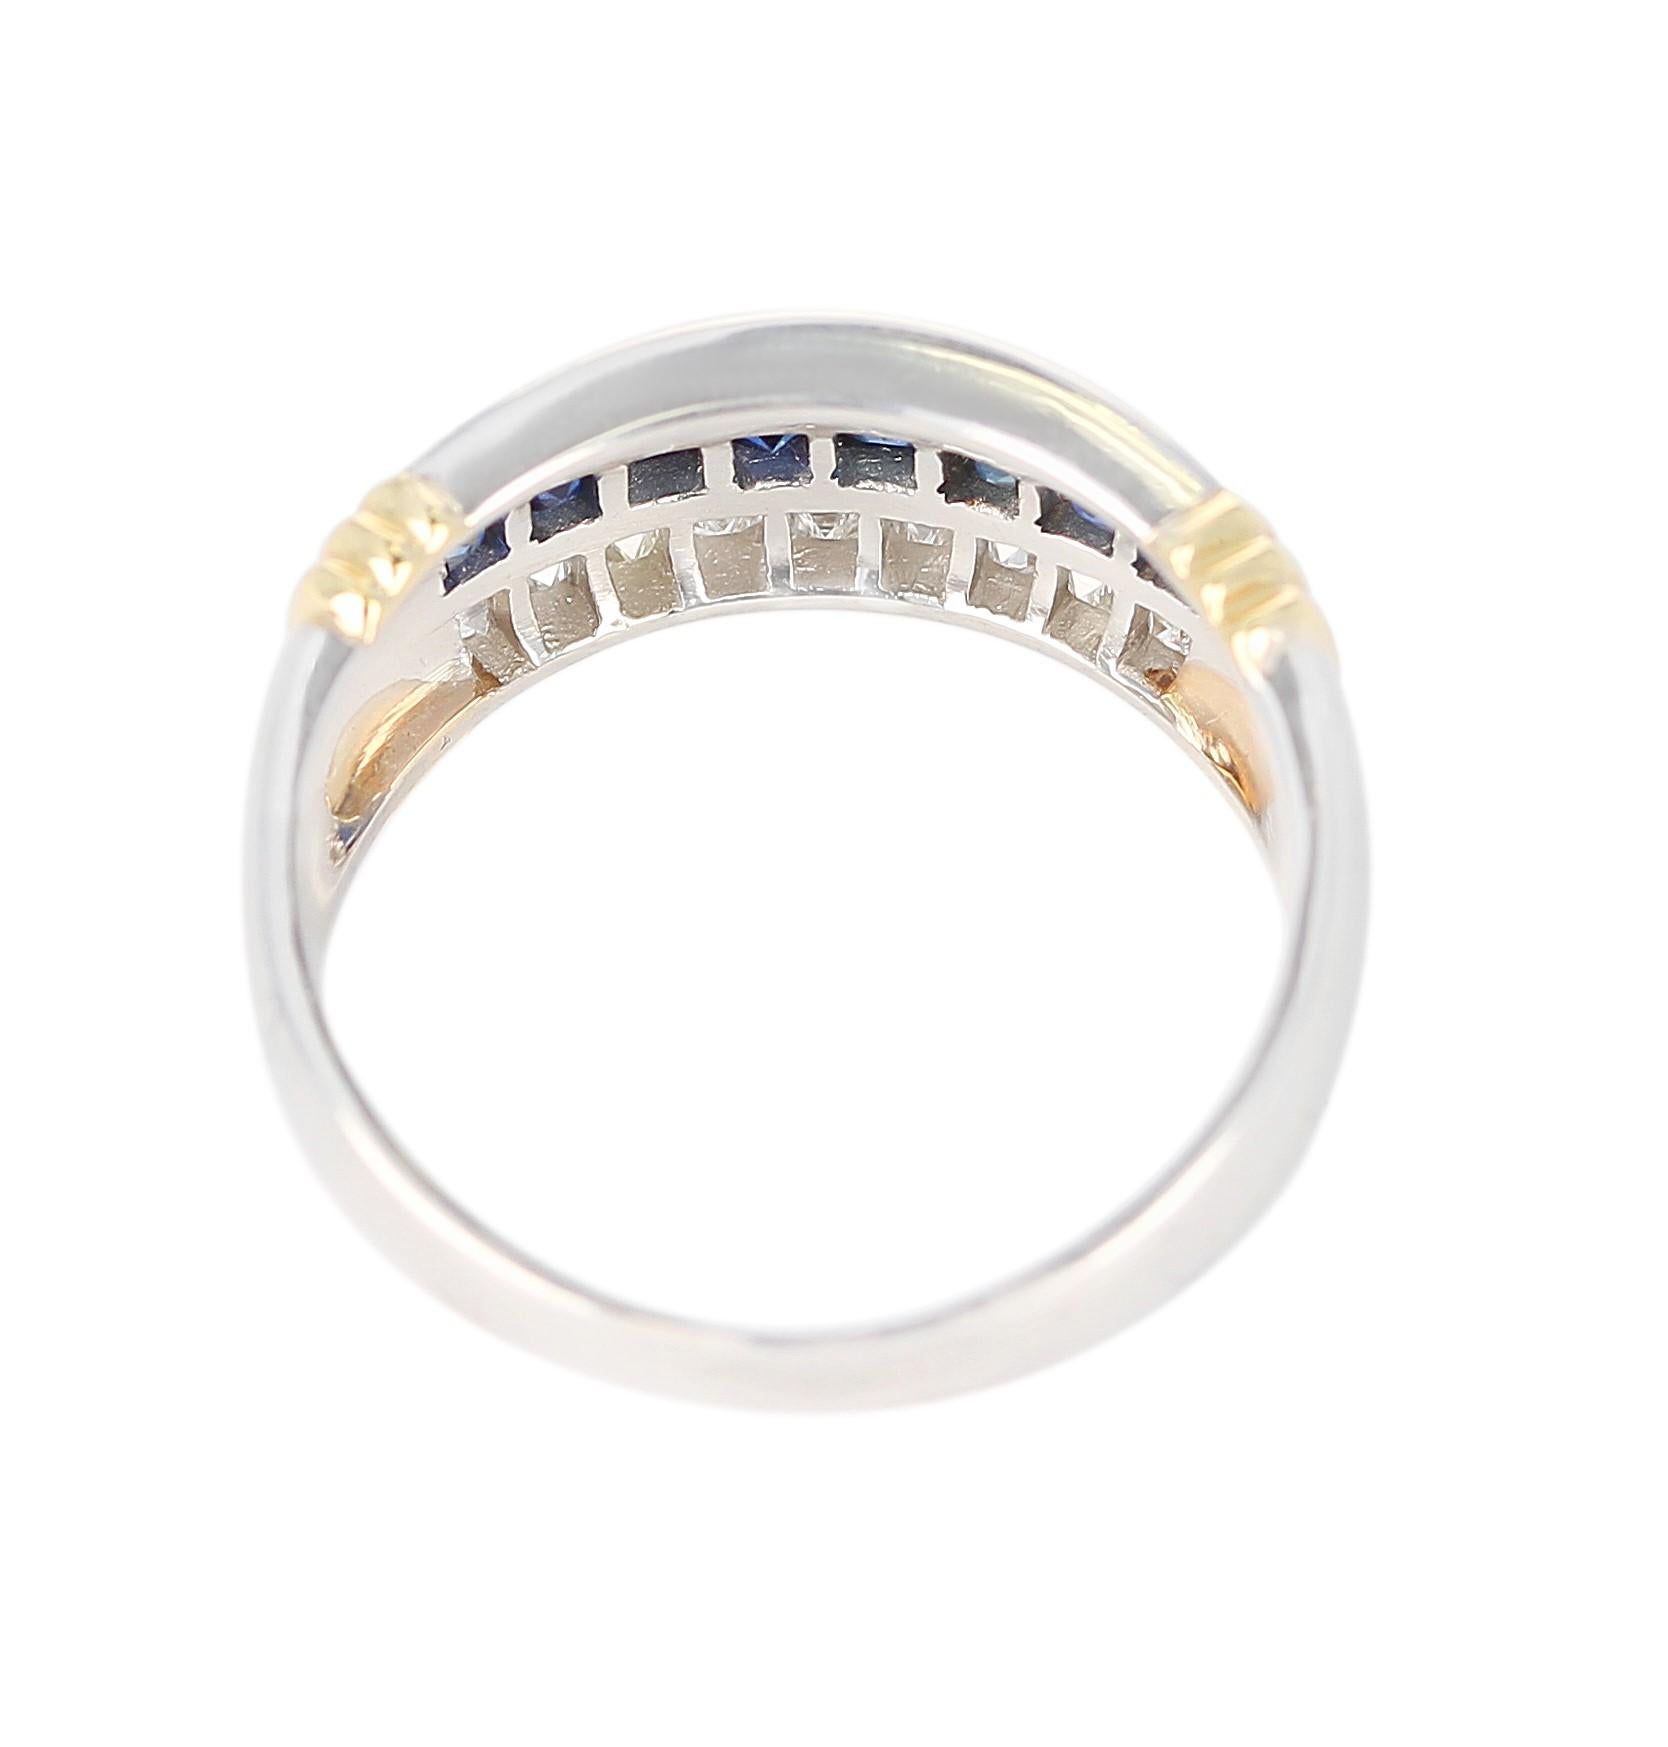 Square Cut Channel Set Sapphire and Diamond Band with Two 18 Karat Gold Linings, Platinum